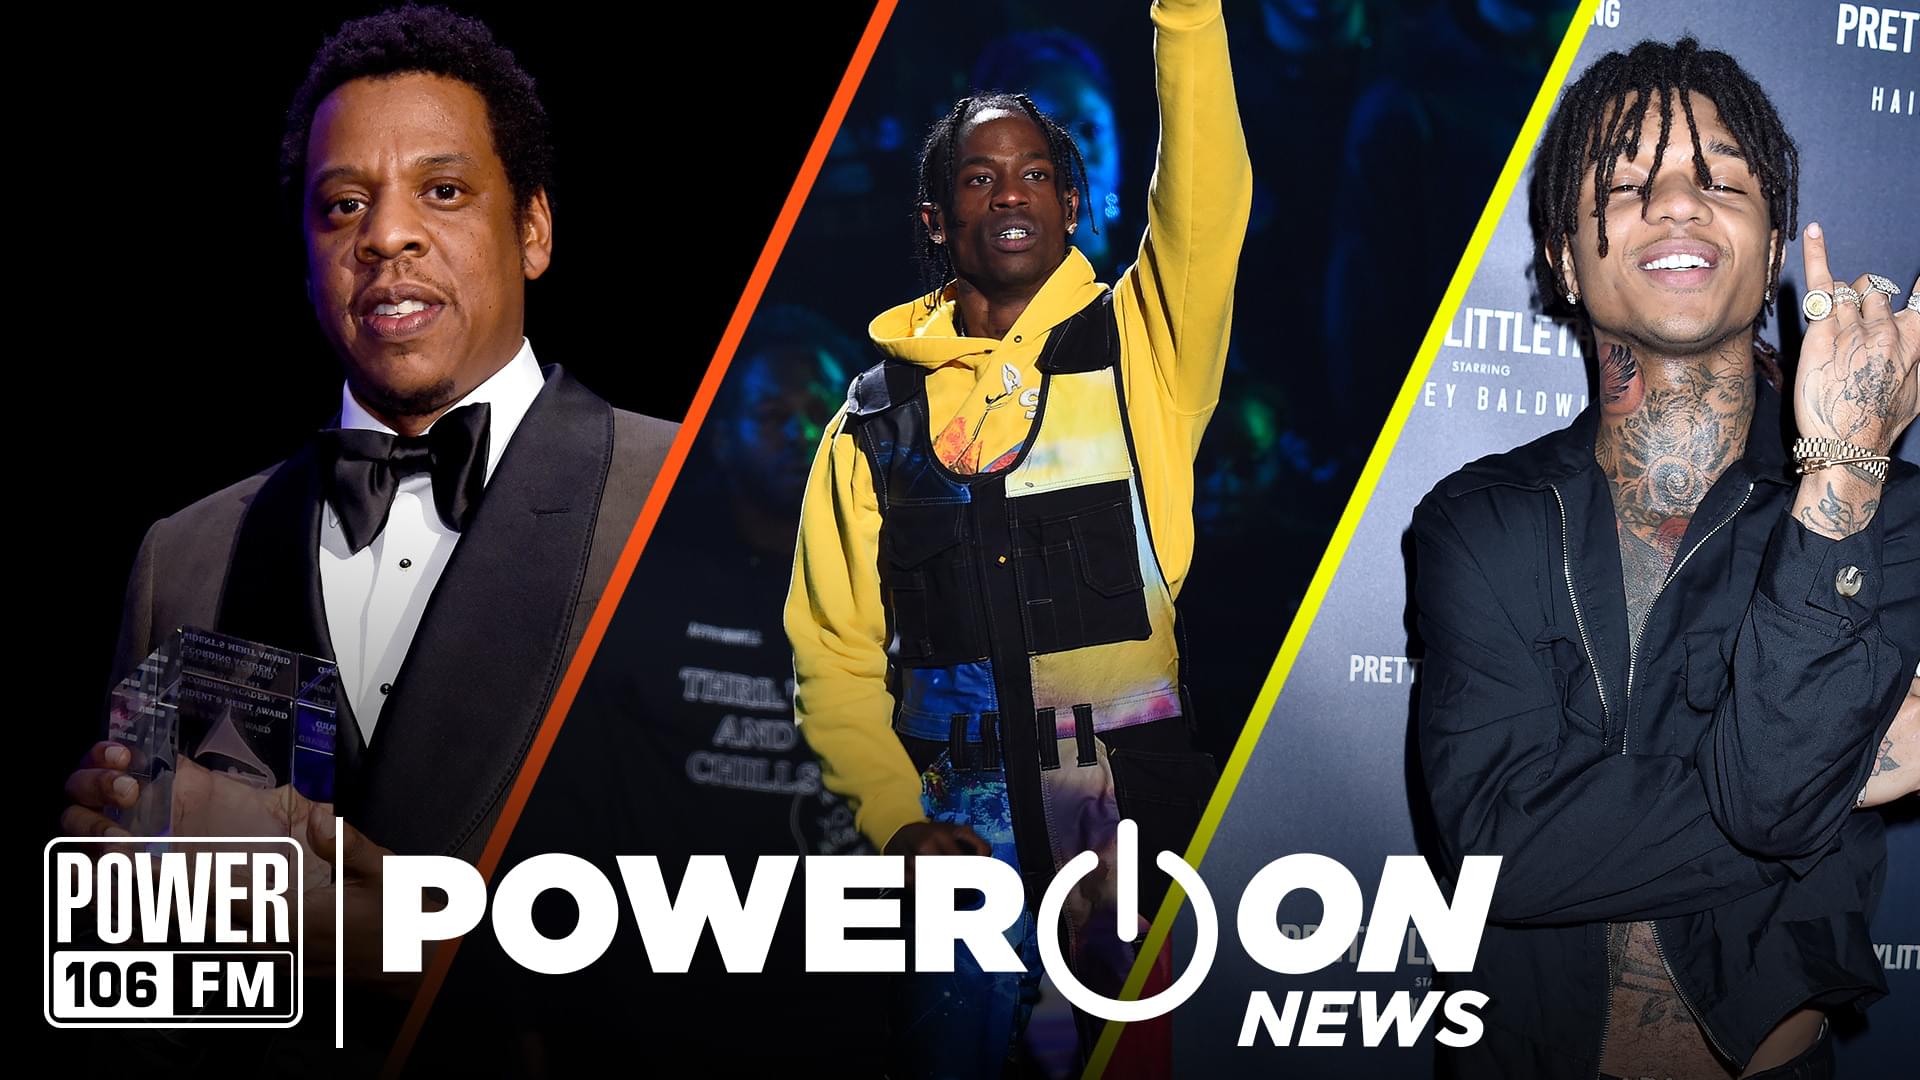 #PowerOn: Kylie Jenner & Jay Z Tied On Forbes, Travis Scott Books Super Bowl, Swae Lee Exposes His Goods